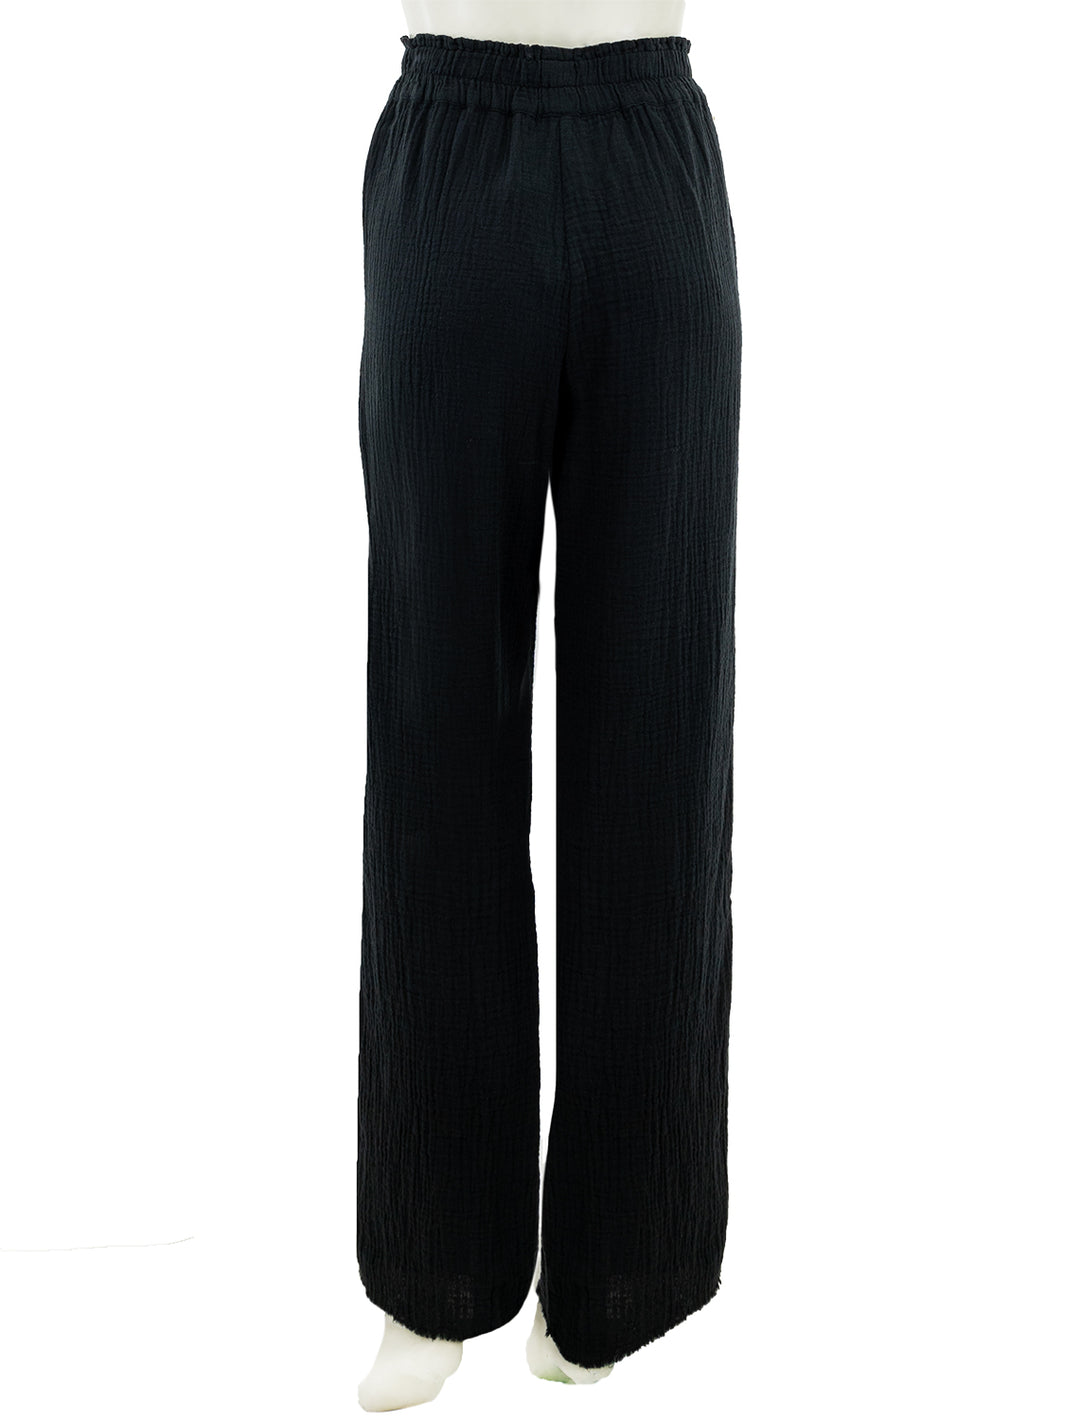 Back view of Rails' leon pant in black.